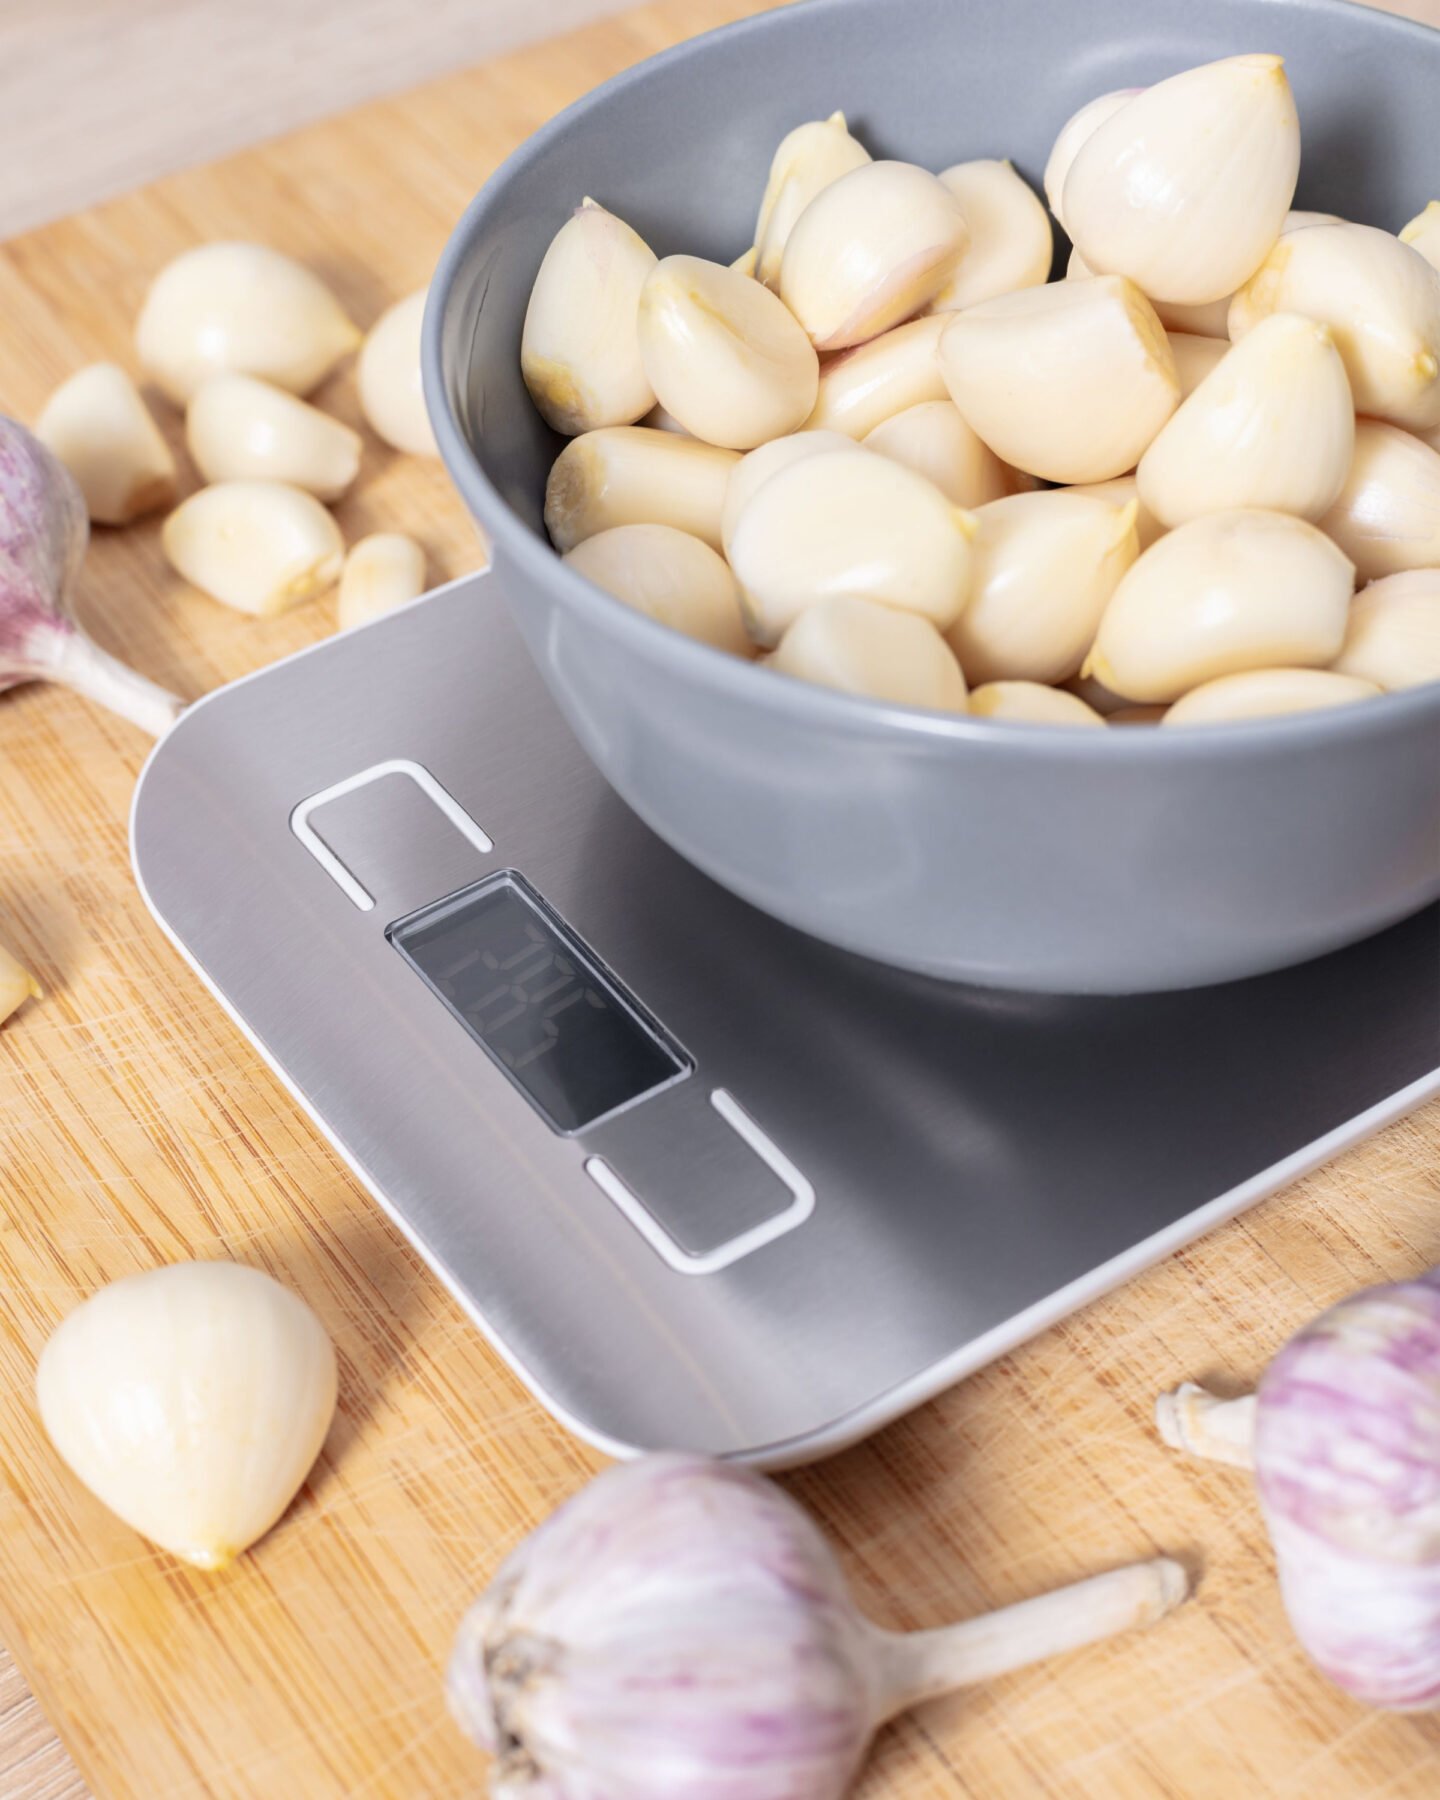 peeled garlic cloves on a kitchen scale